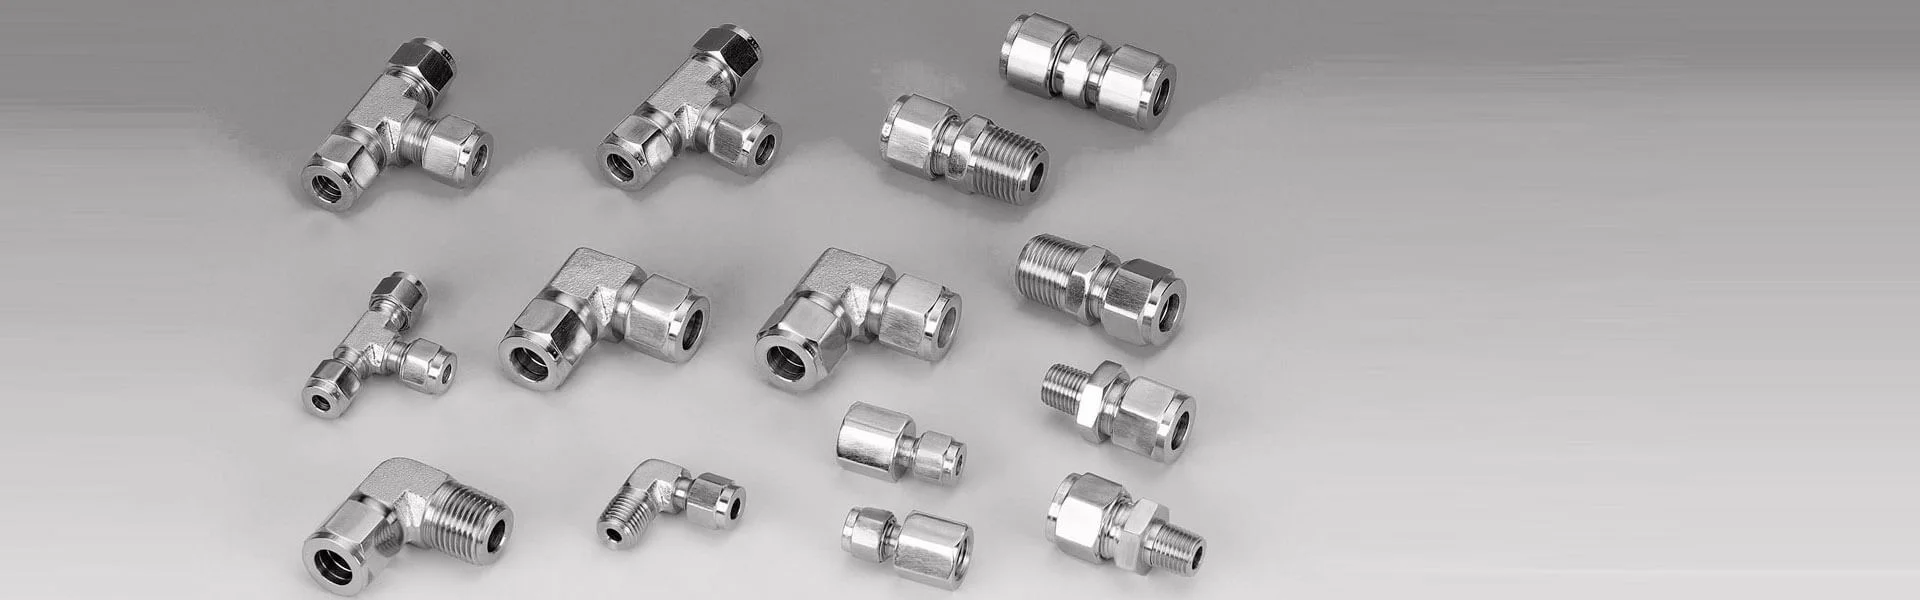 High Pressure Compression Tube Fittings